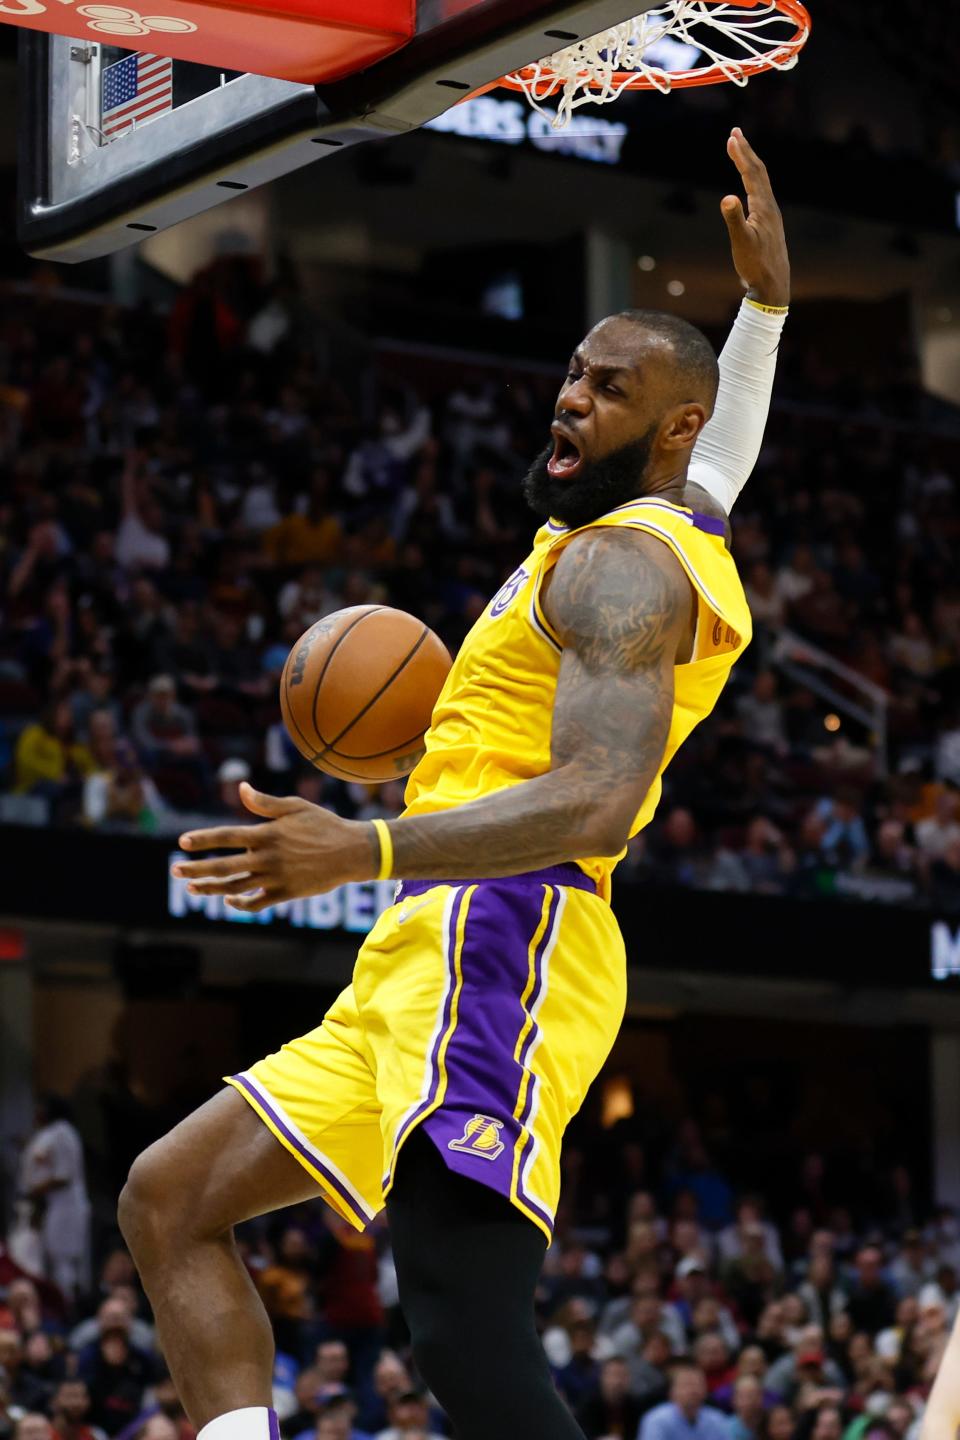 Los Angeles Lakers' LeBron James dunks against the Cleveland Cavaliers during the second half of an NBA basketball game, Monday, March 21, 2022, in Cleveland. (AP Photo/Ron Schwane)